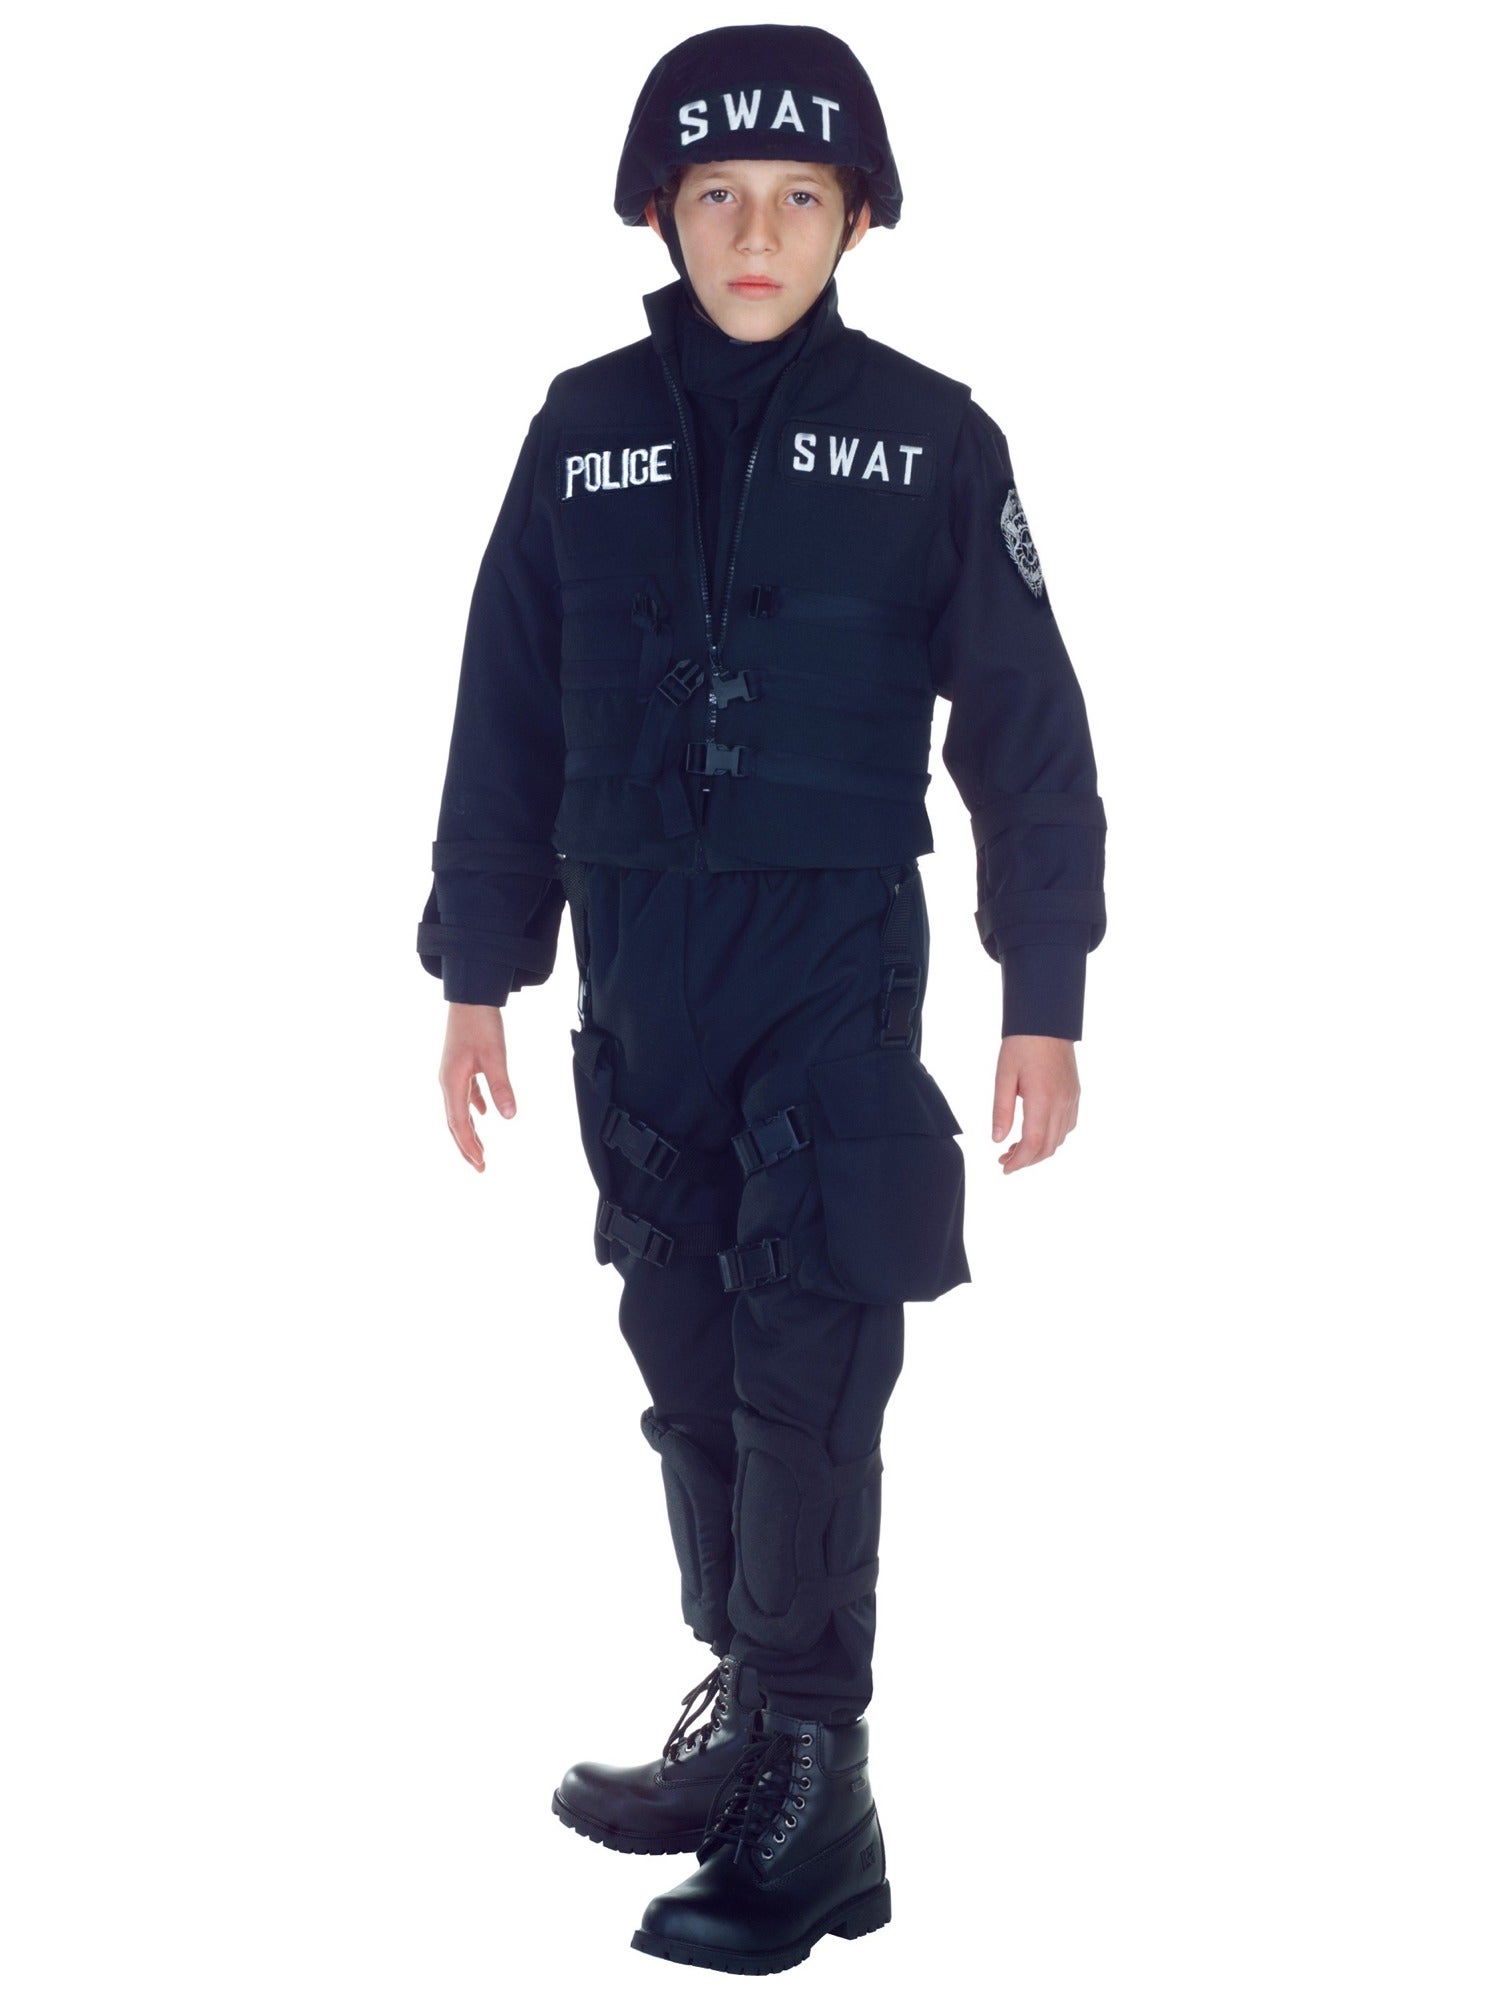 Hobbypos SWAT S.W.A.T. Military Police Cop Commander Book Week Boys Costume